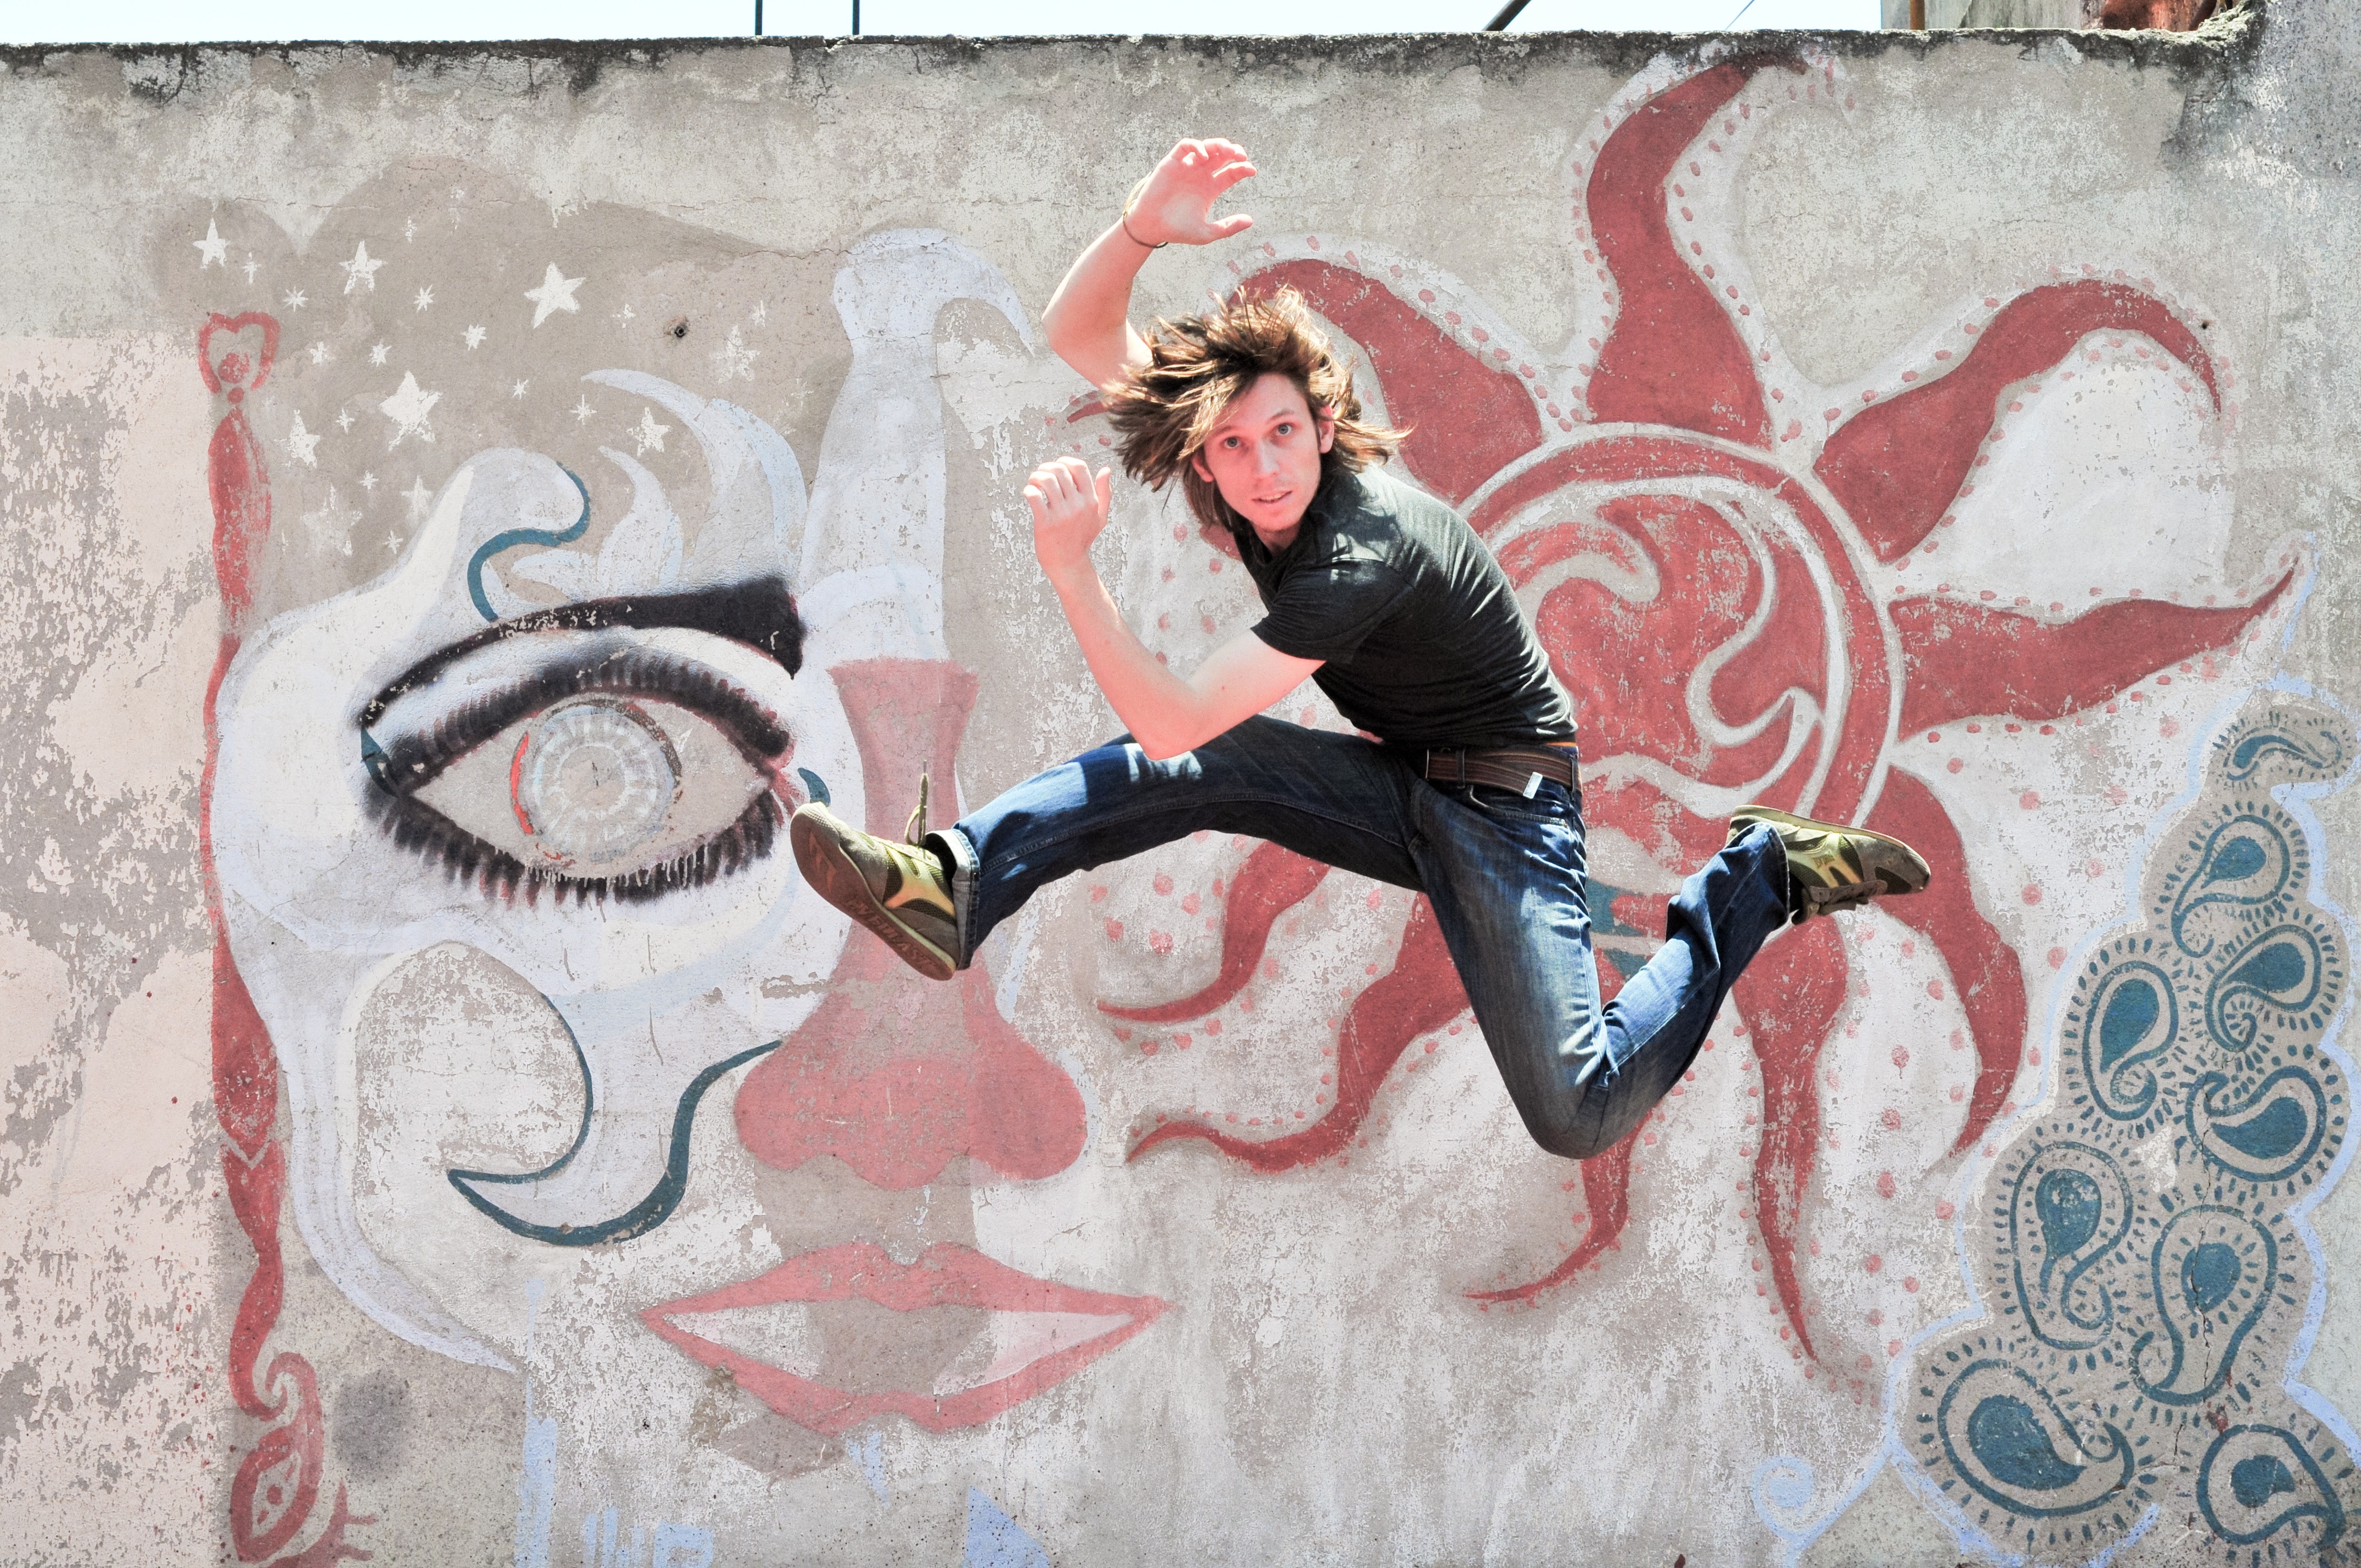 Concrete, Jumping, Wall, Person, Male, full length, human arm